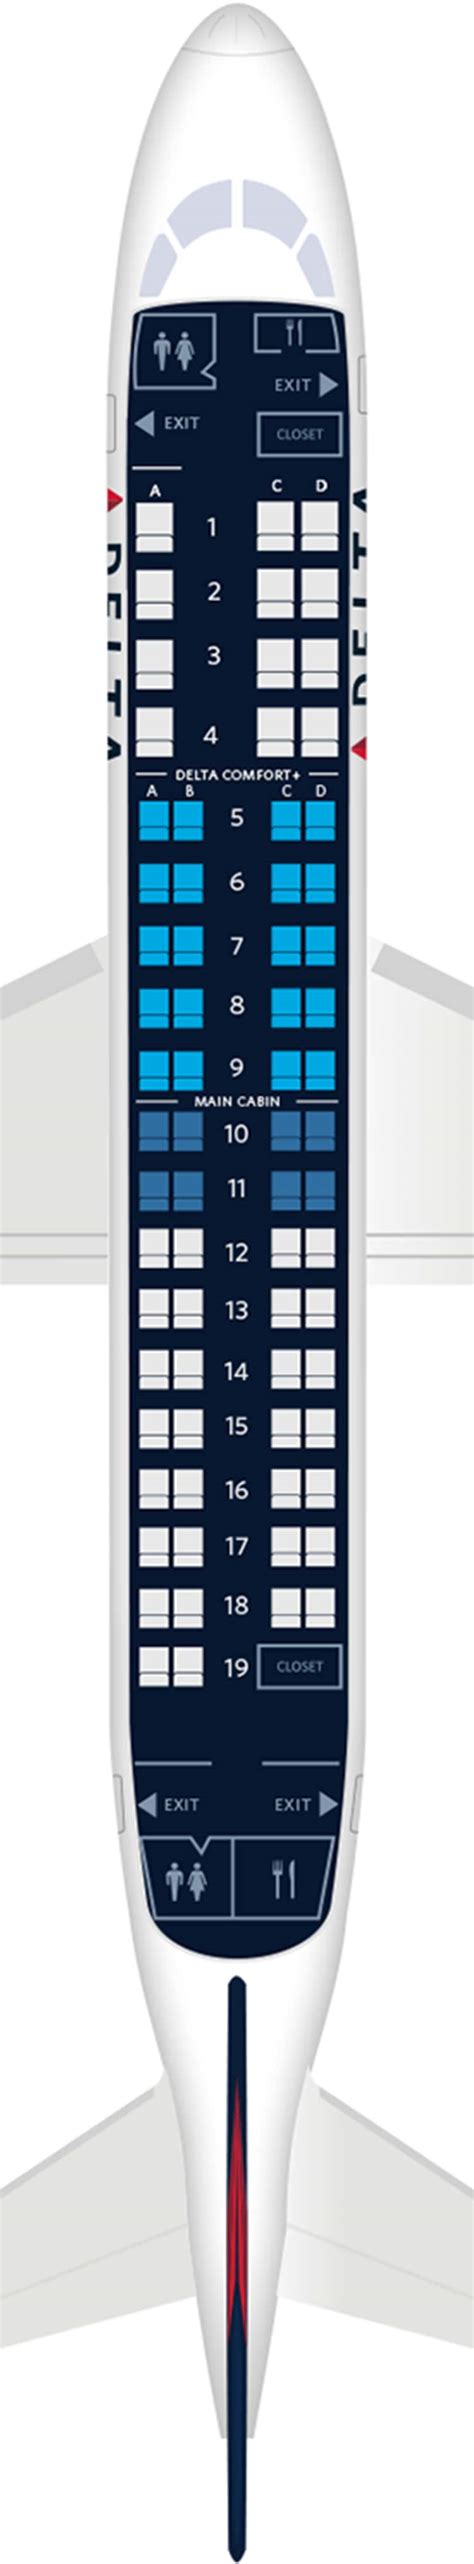 Embraer 175 seating map. Embraer 175. Embraer 175 is a slightly longer version of the narrow-body jet Embraer 170. In our fleet, it is used for domestic and long-distance flights. Thanks to efficient and effective engines, this airplane meets strict noise standards, and the raised wing tips - the so-called winglets - reduce air resistance, which permits to reduce ... 